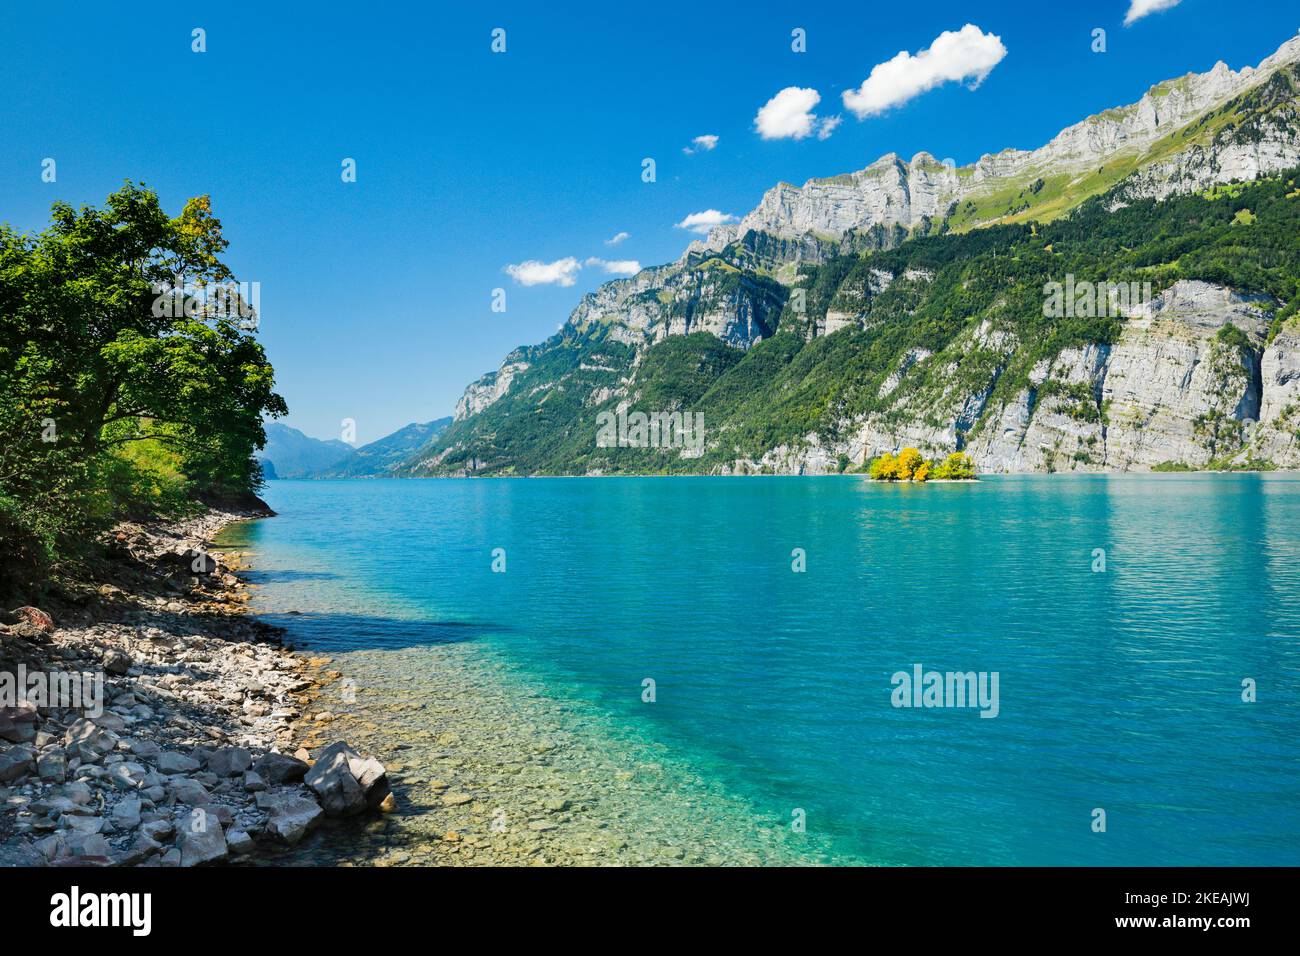 Lake Walen with small island at the foot of the Churfirsten and massifs Schaeren and Leistchamm in the background, Switzerland, St. Gallen Stock Photo